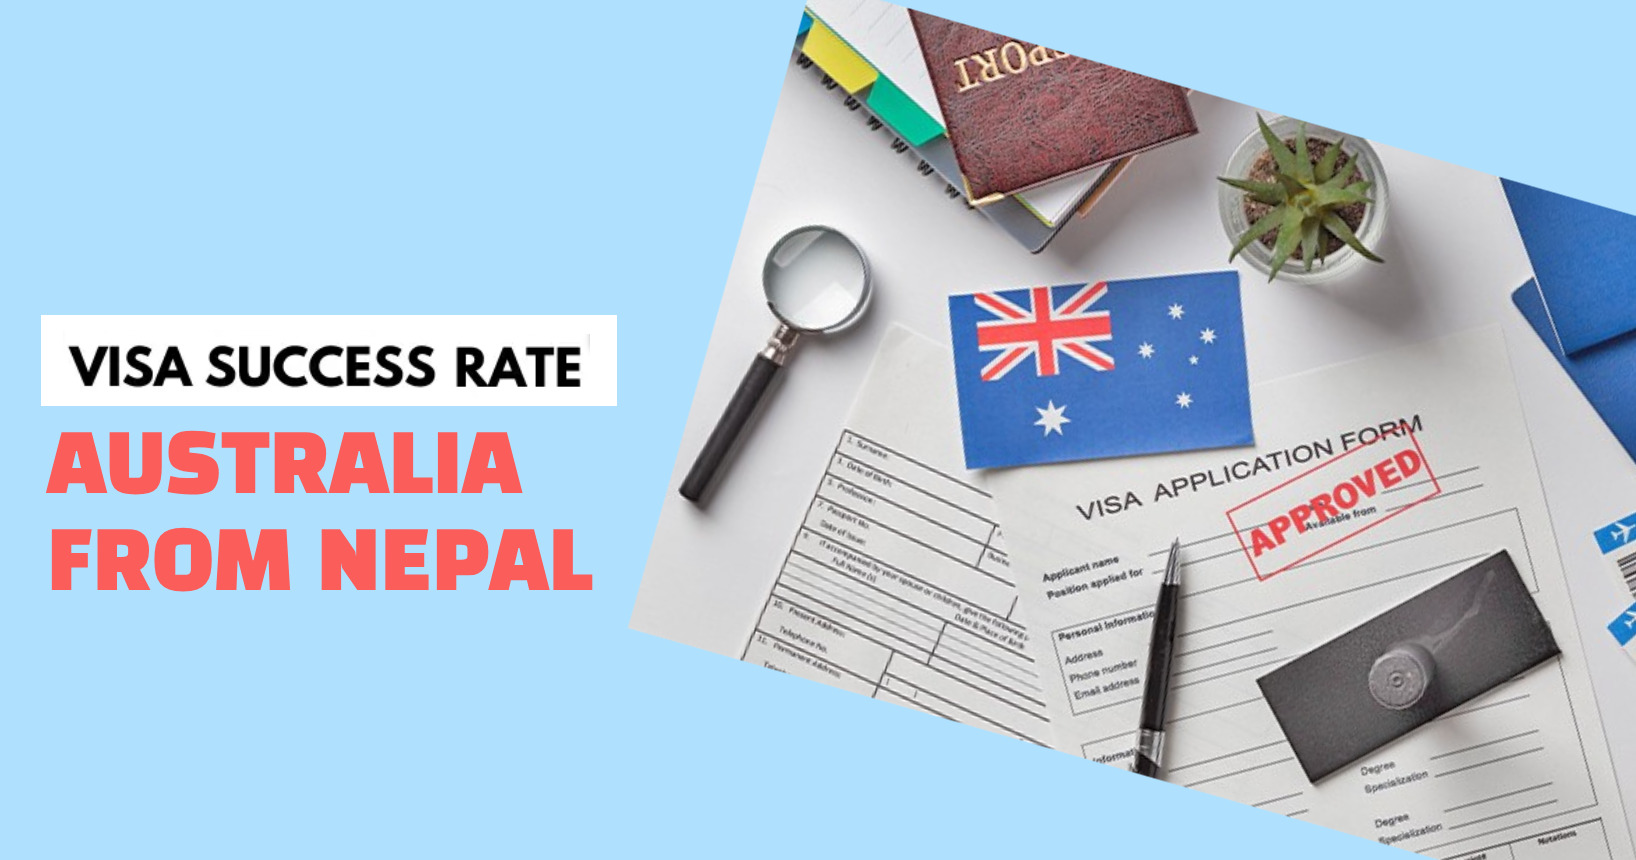 Visa Success Rate for Australia from Nepal